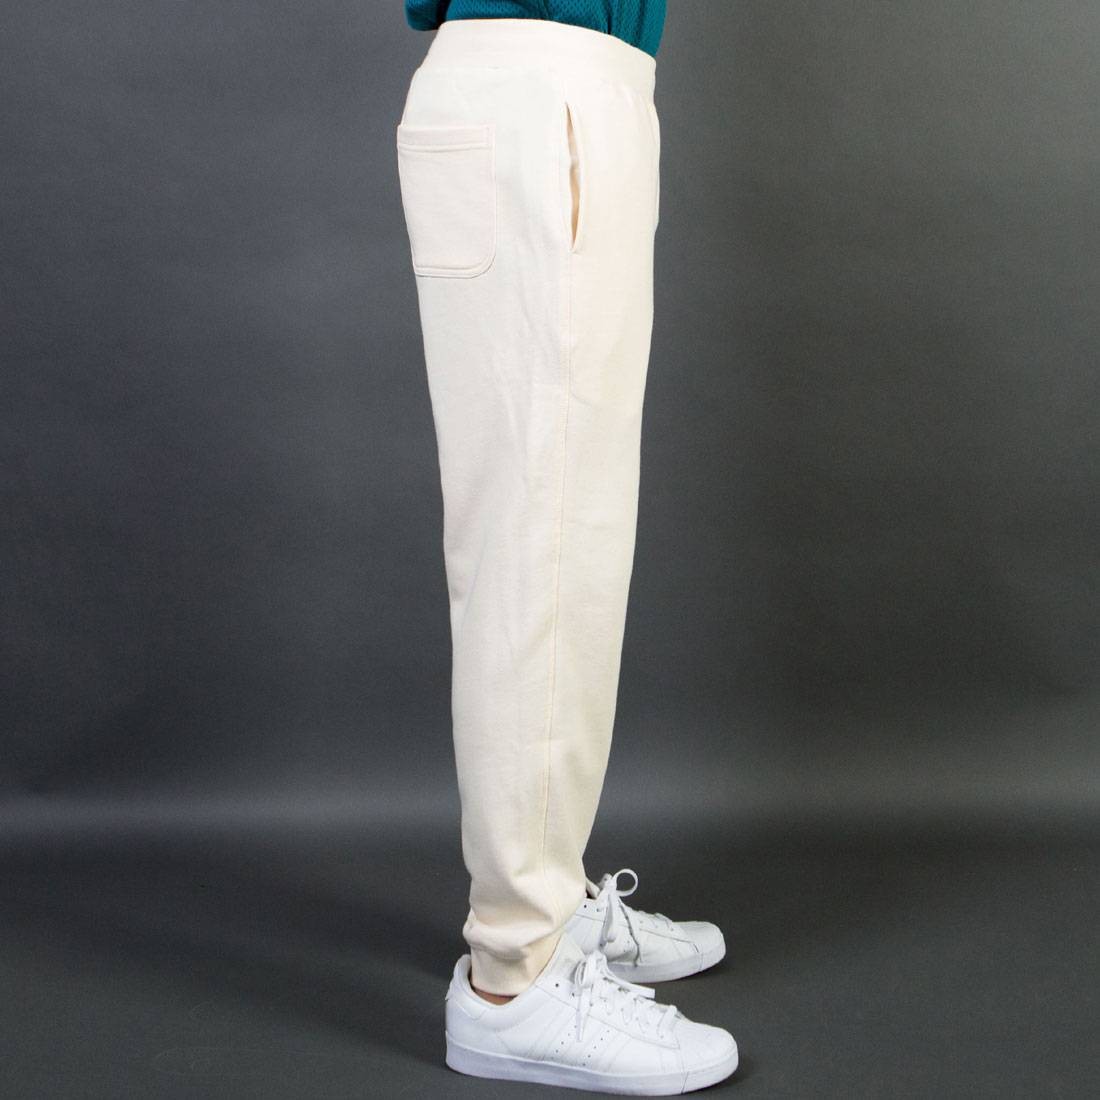 Undefeated Men Undefeated Sweatpants white offwhite